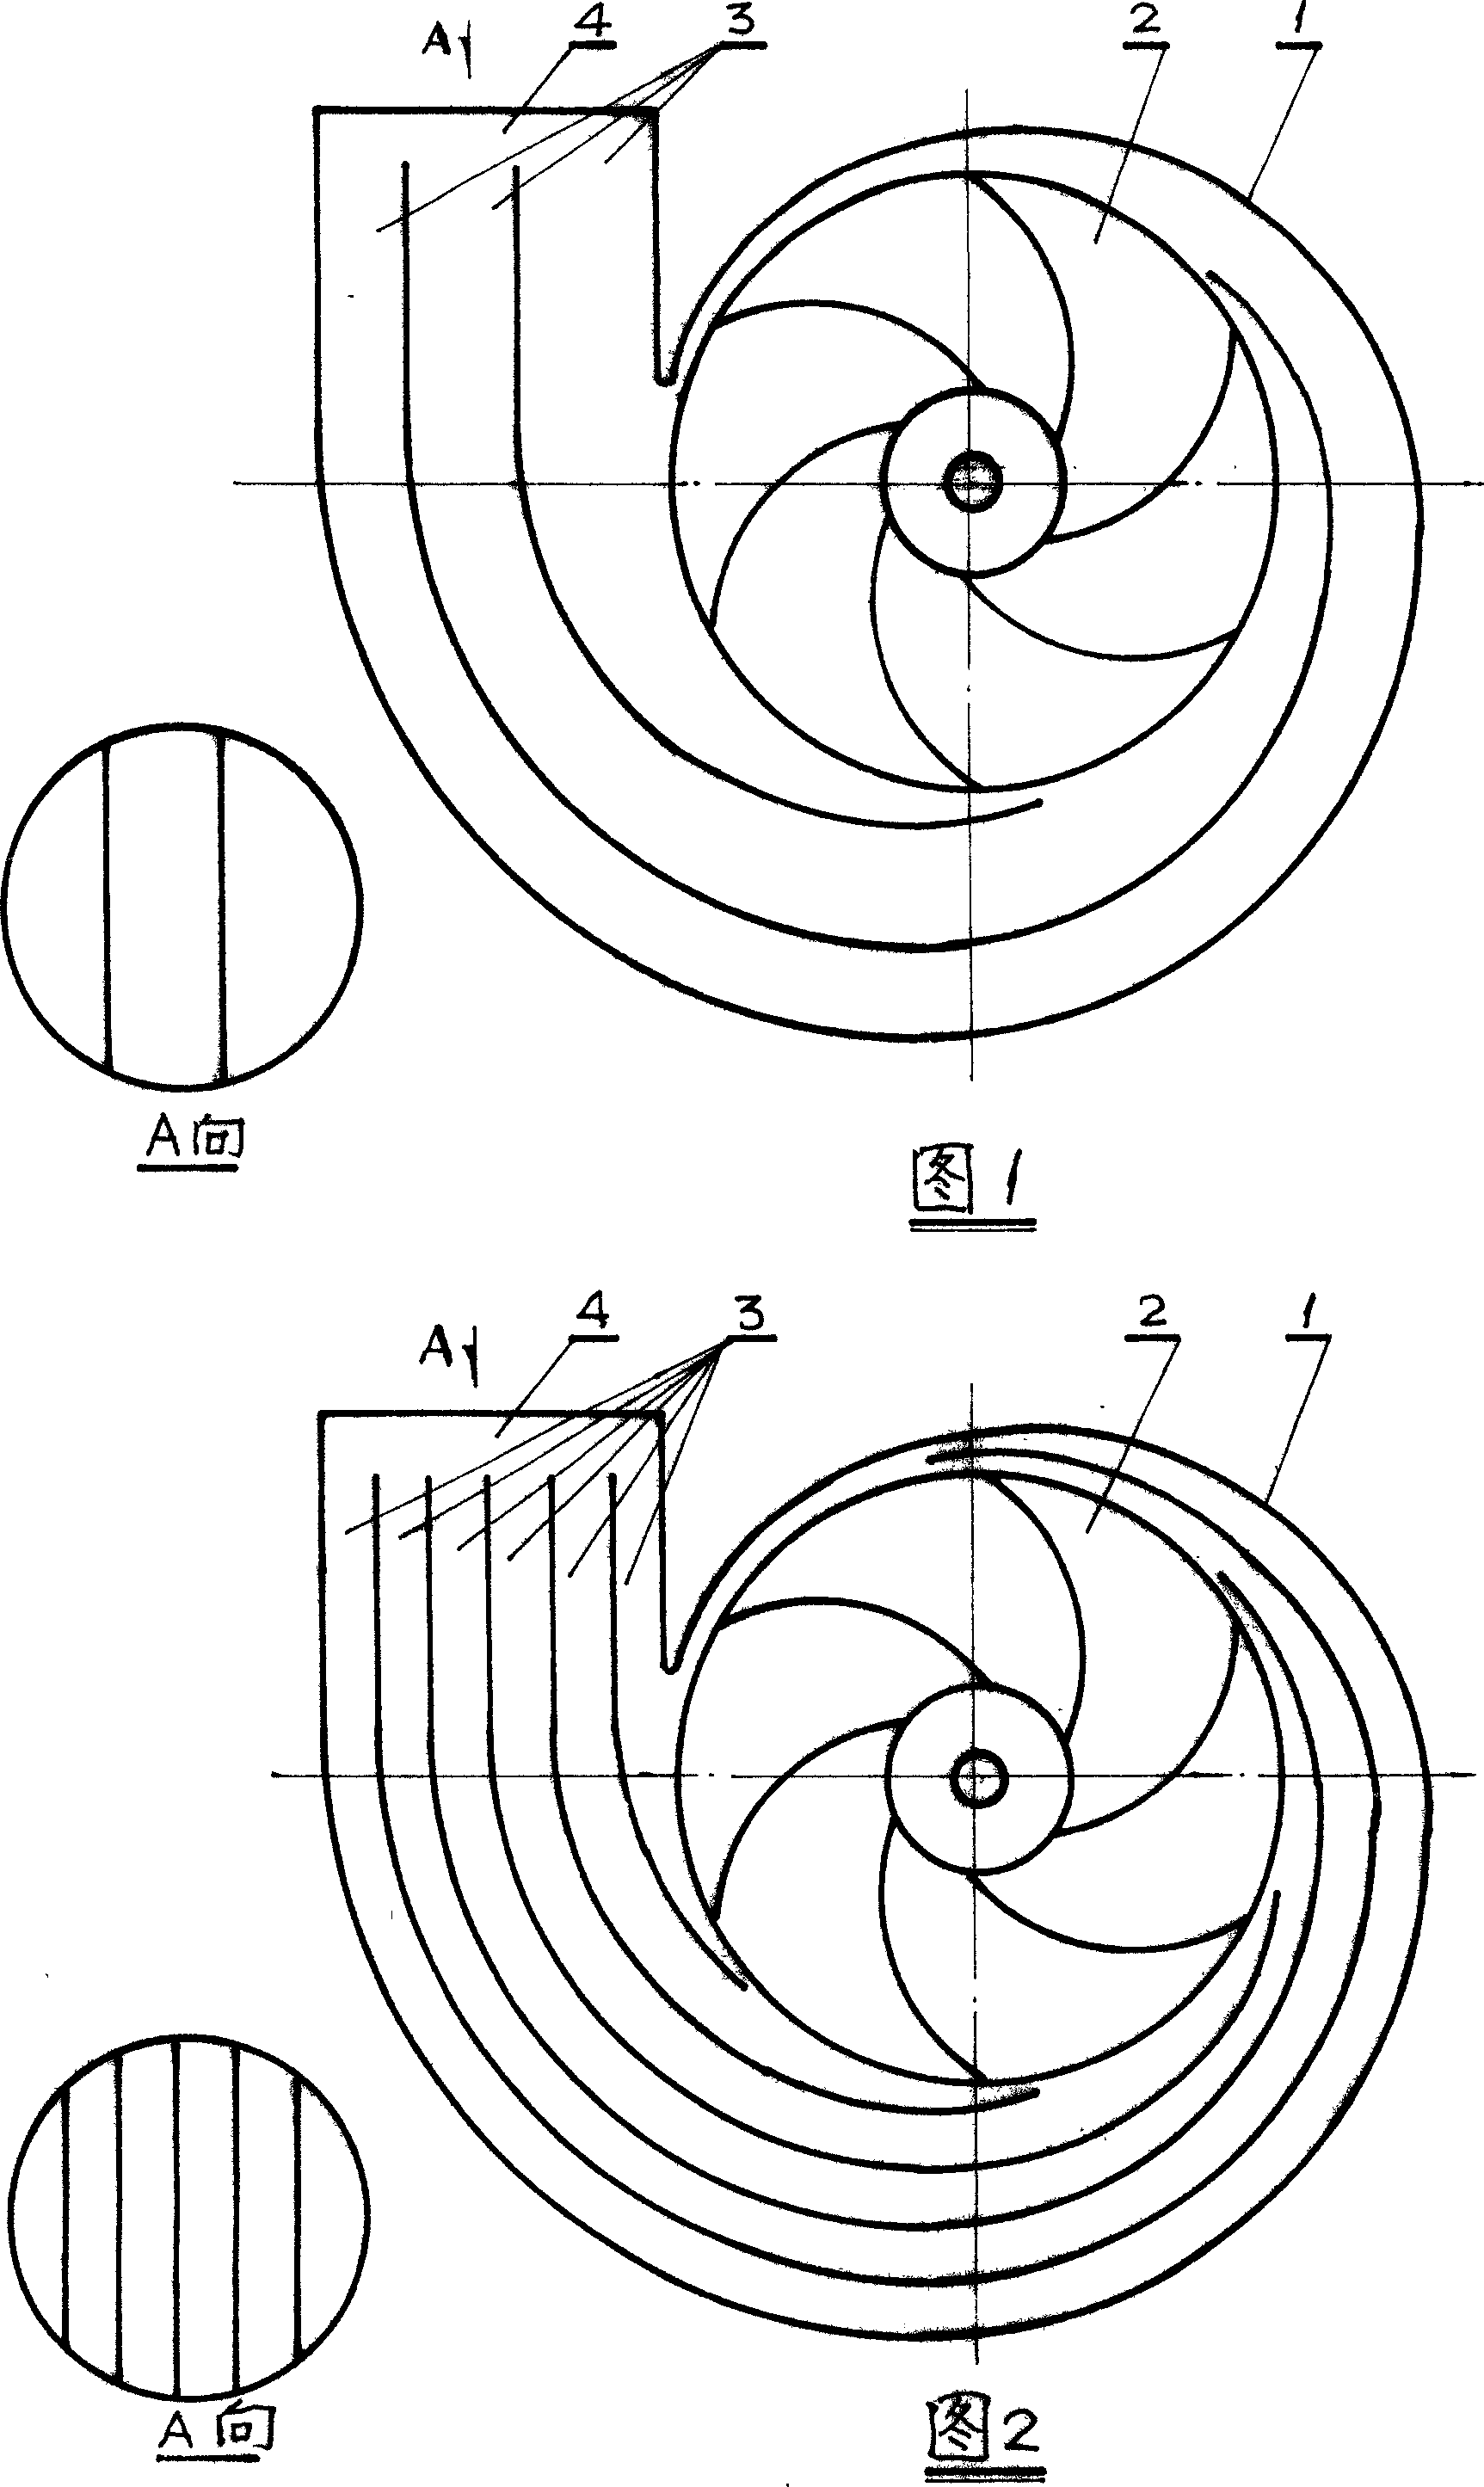 Centrifugal pump having extrusion chamber with subchannel